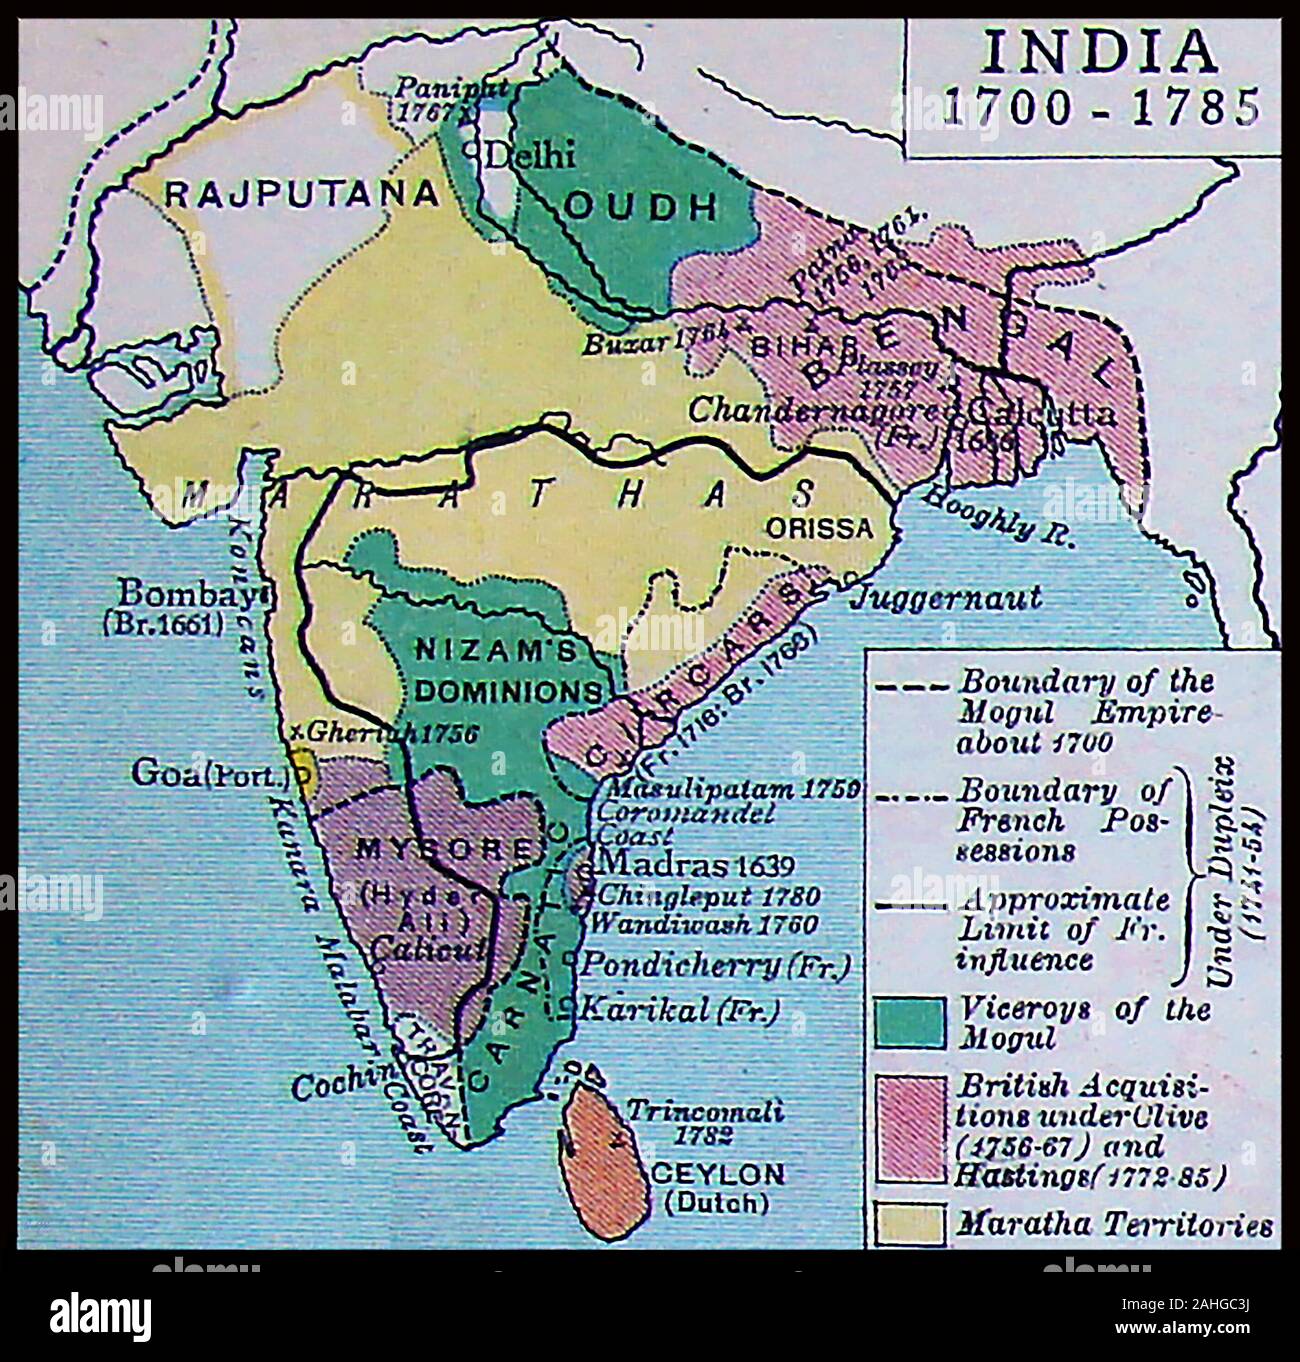 a-1922-map-showing-india-in-the-18th-century-including-the-former-mogul-empire-and-british-french-possessions-2AHGC3J.jpg